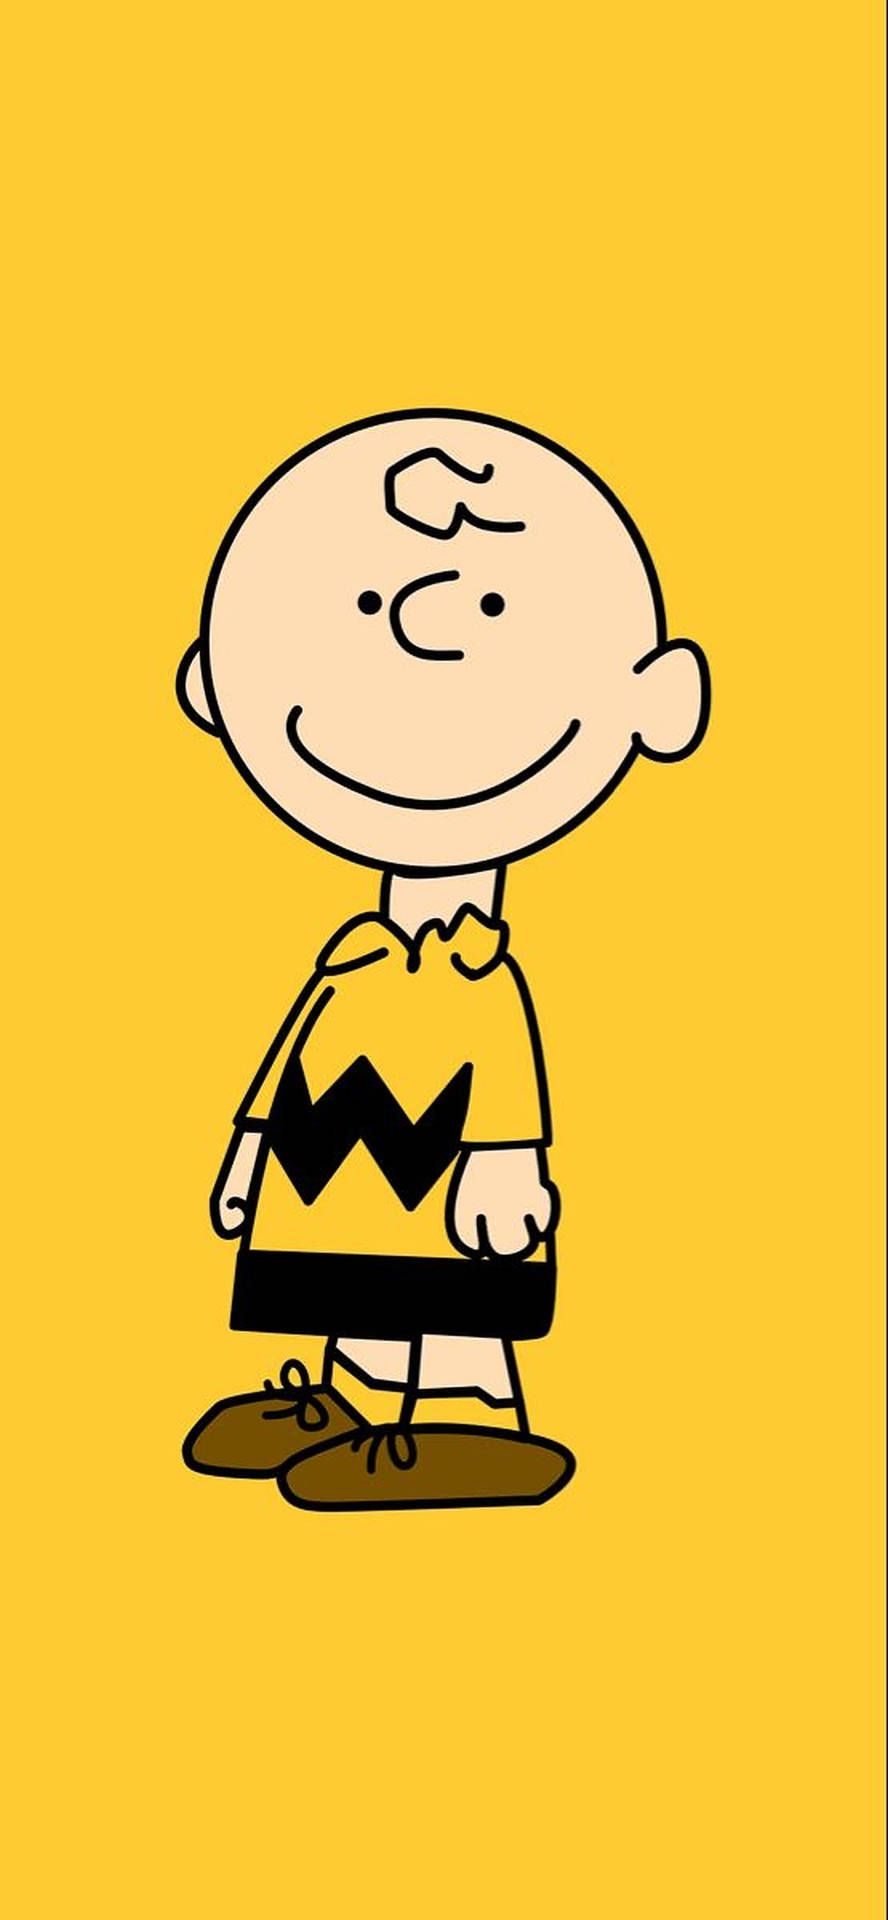 Charlie Brown iPhone Wallpaper with high-resolution 1080x1920 pixel. You can use this wallpaper for your iPhone 5, 6, 7, 8, X, XS, XR backgrounds, Mobile Screensaver, or iPad Lock Screen - Charlie Brown